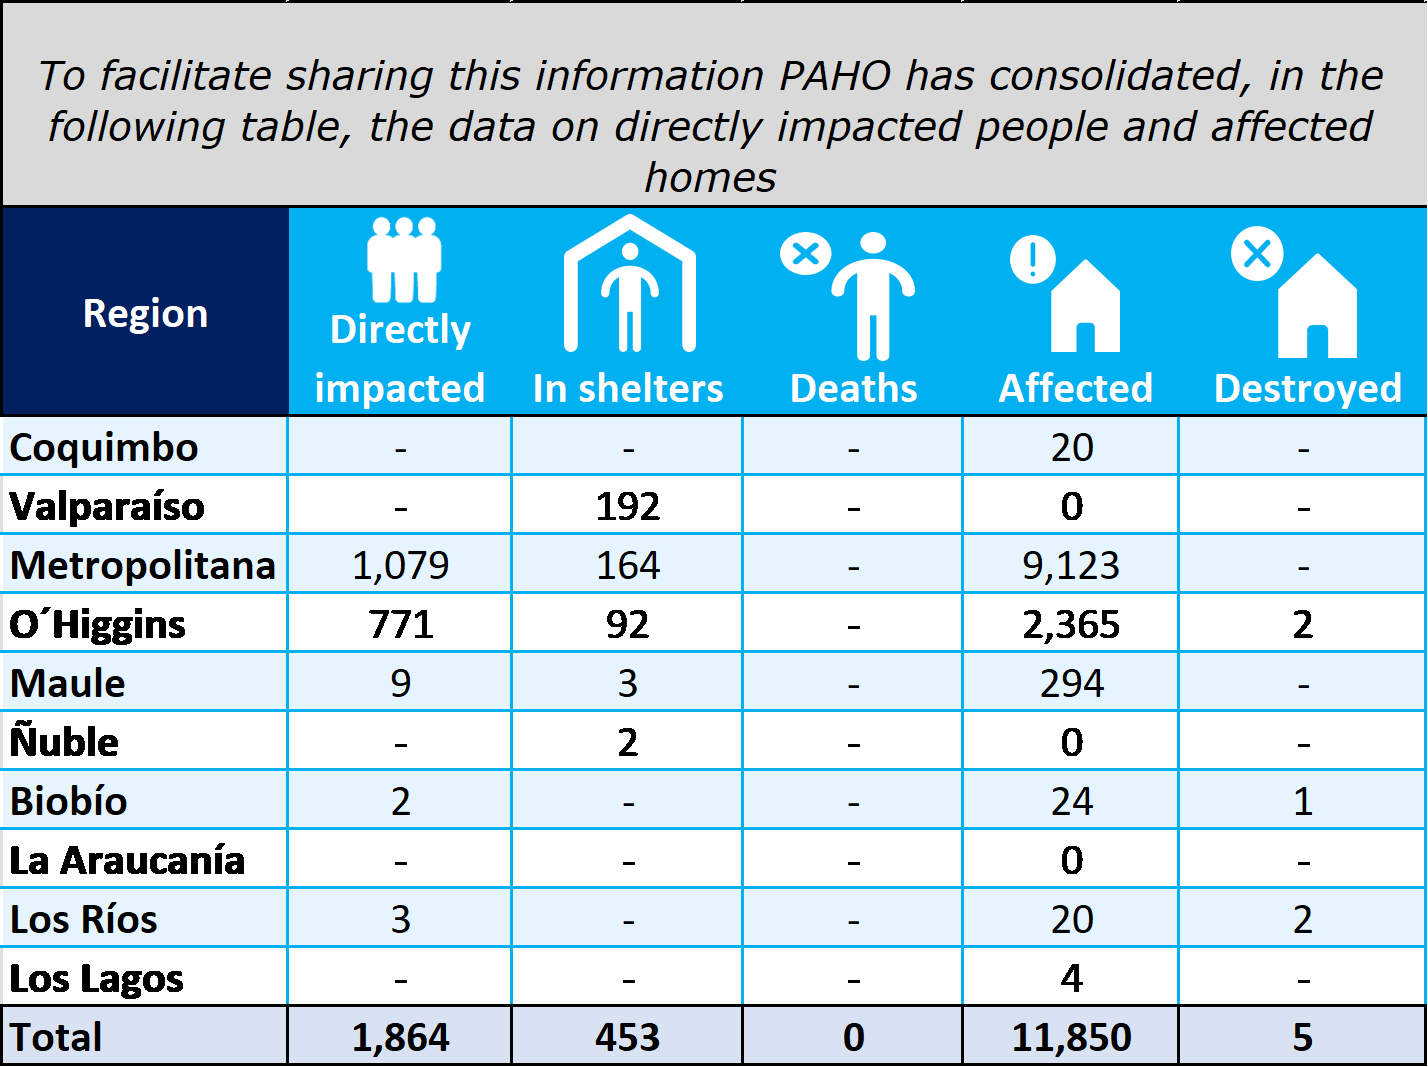 Data on affected persons. This information is also available in the official report.